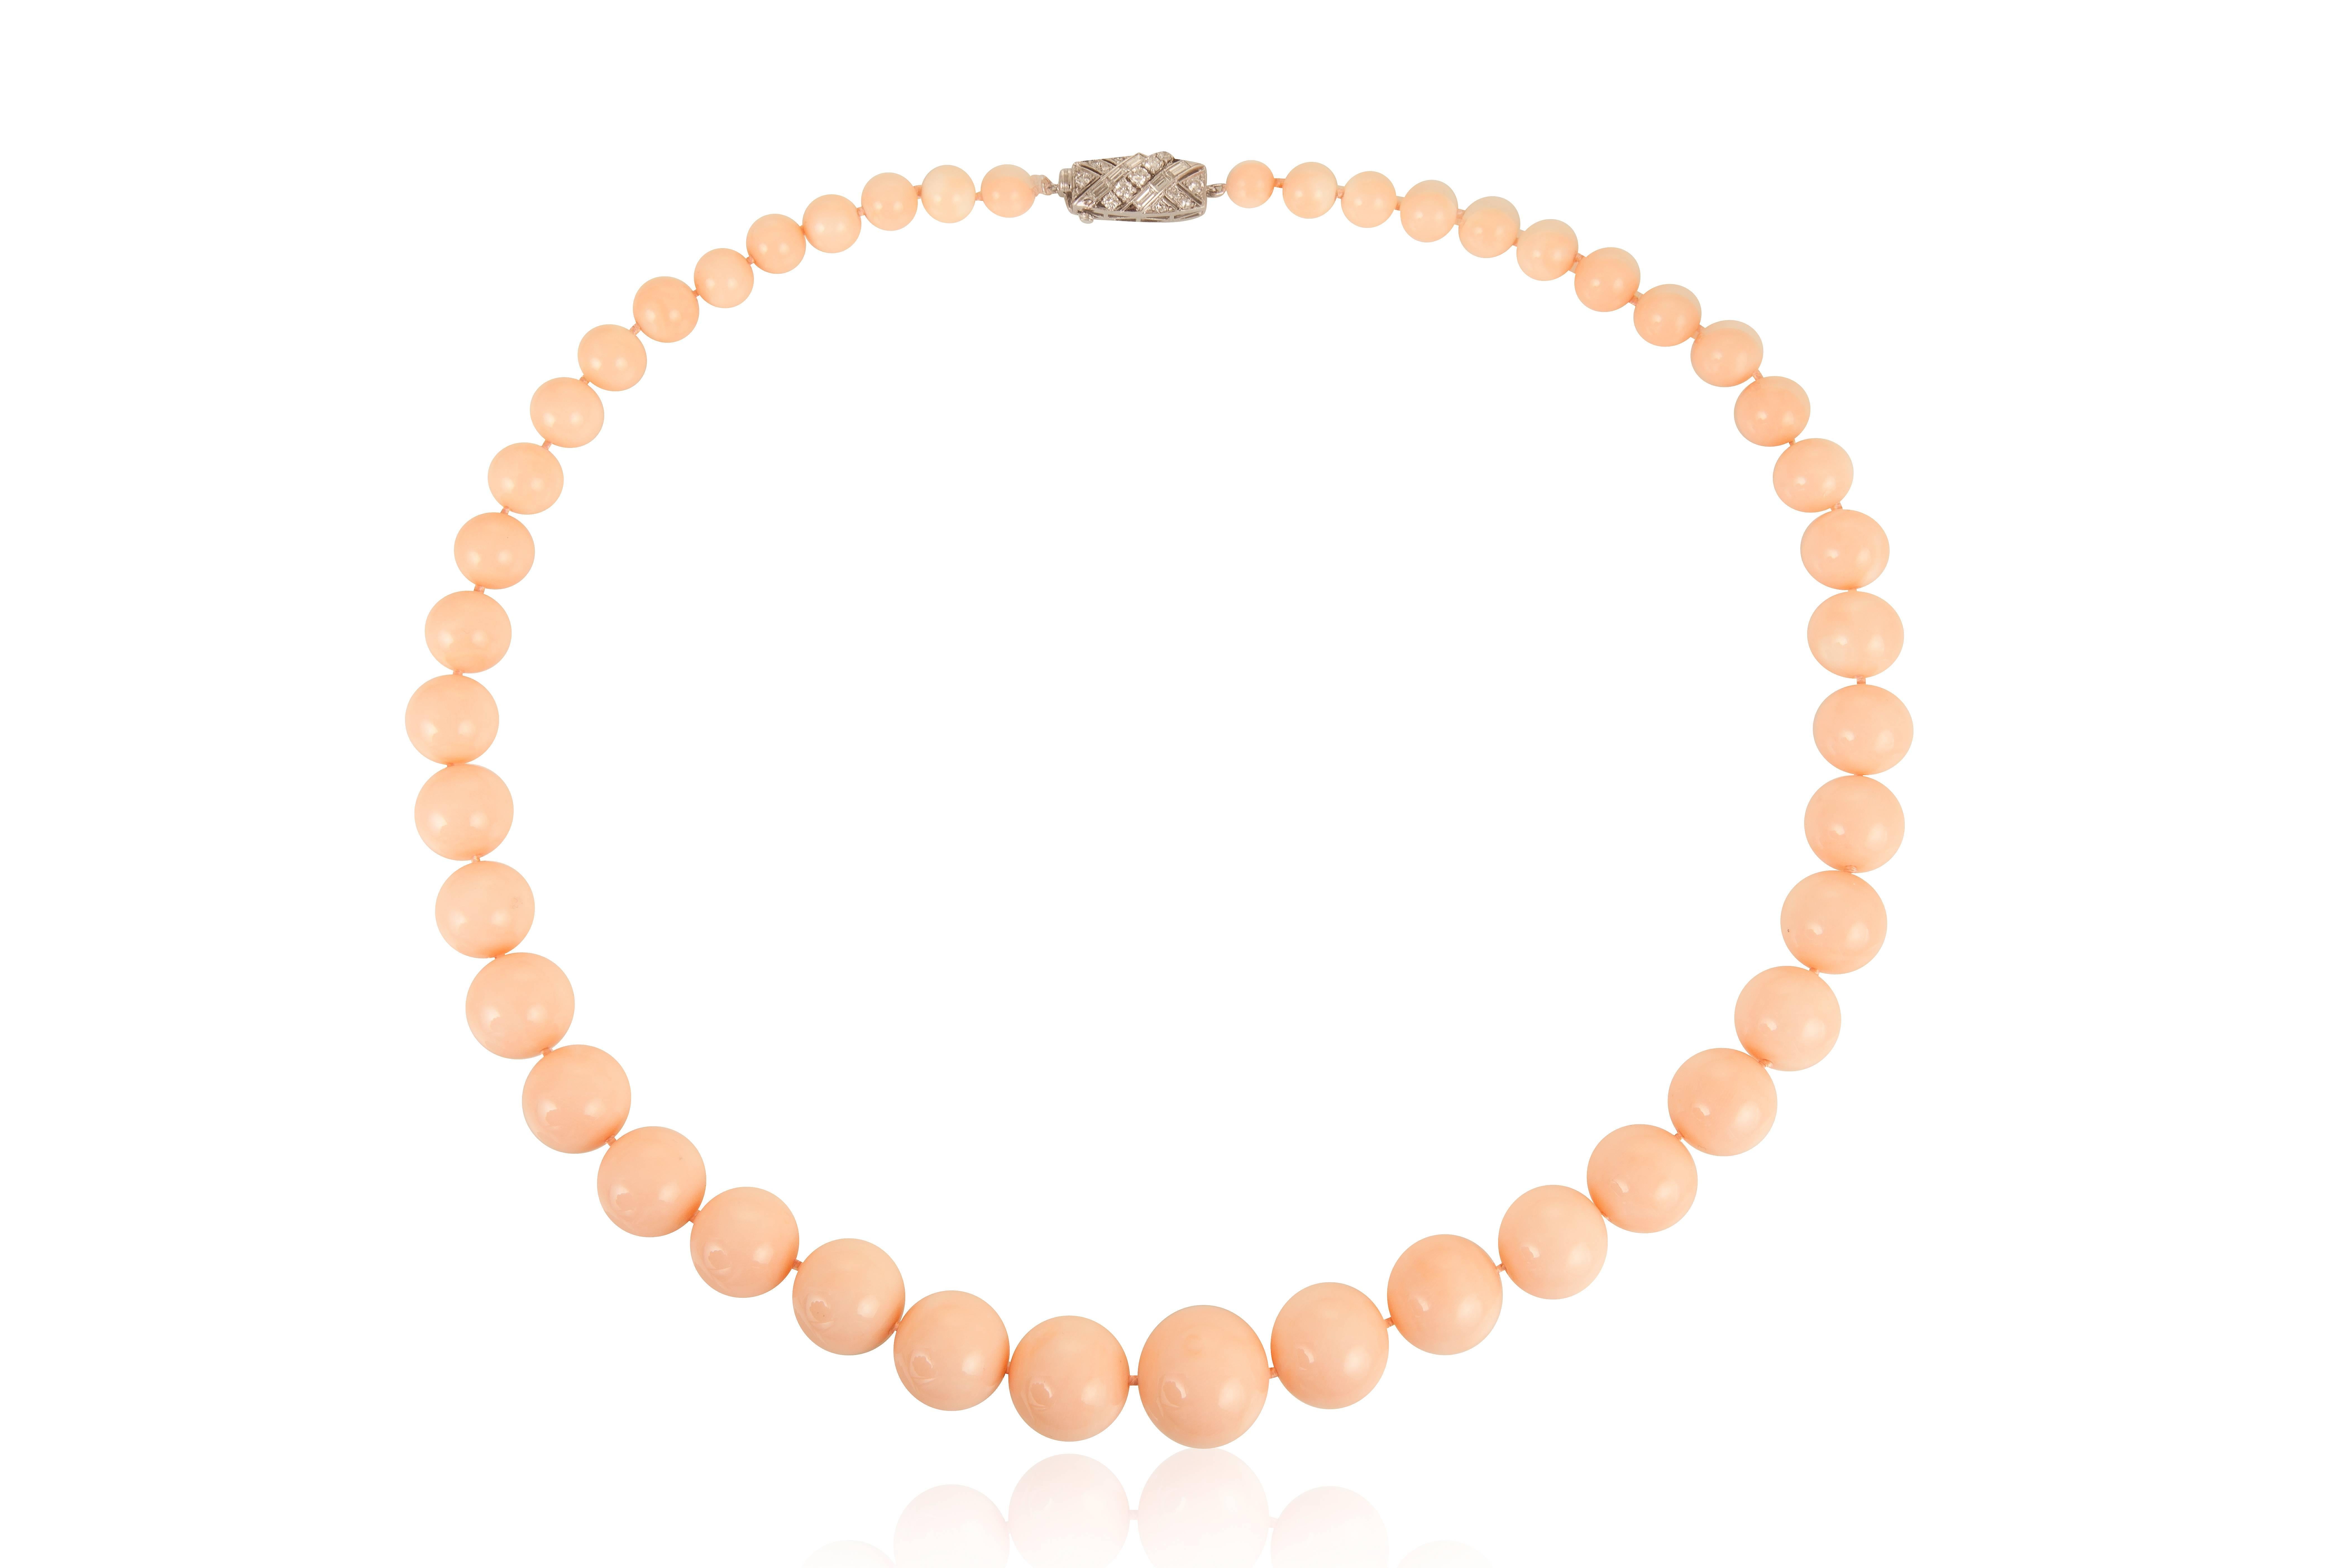 A necklace with 43 graduated beads of “angel skin” coral of great luster, homogenous material, and virtually flawless skin, finished with a tasteful round and baguette diamond clasp.
Dimensions: 22 ¼” long